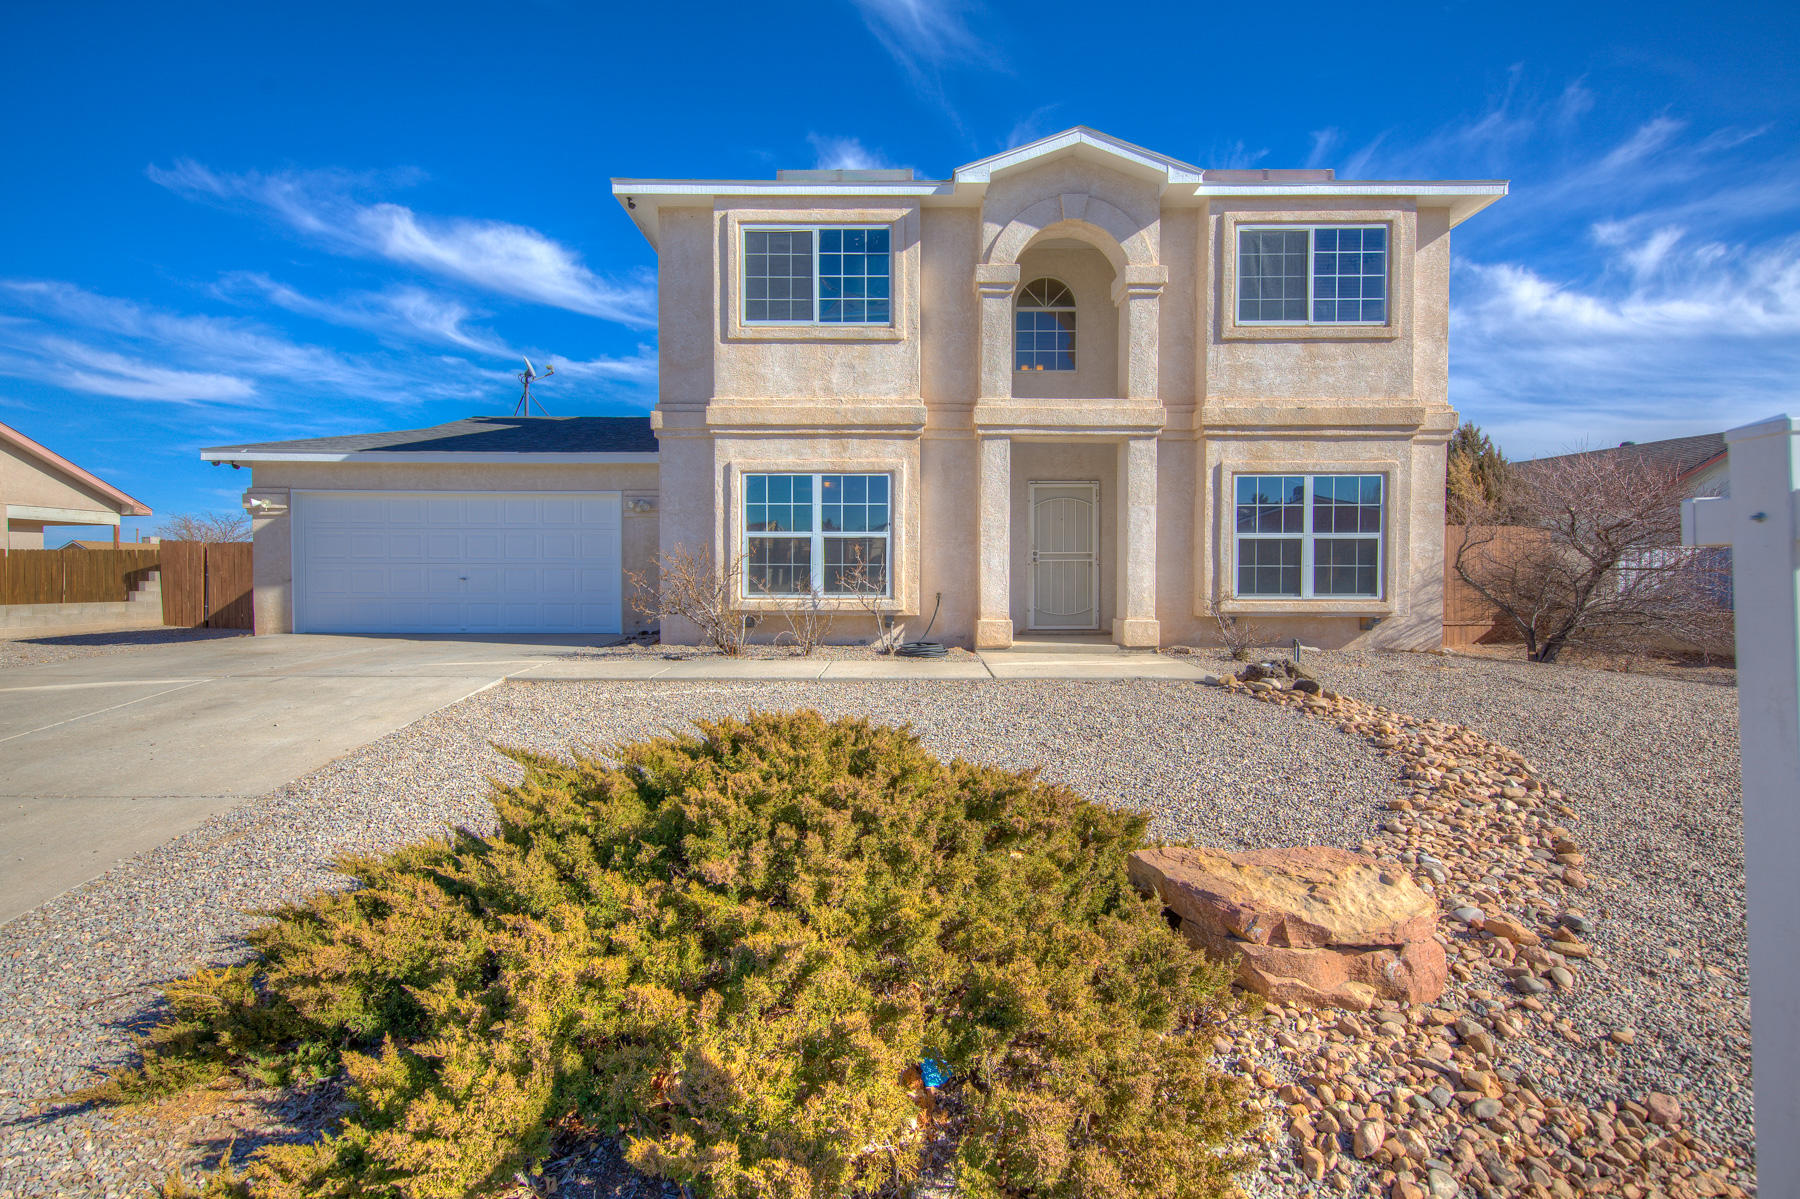 All Rio Rancho Homes for Sale